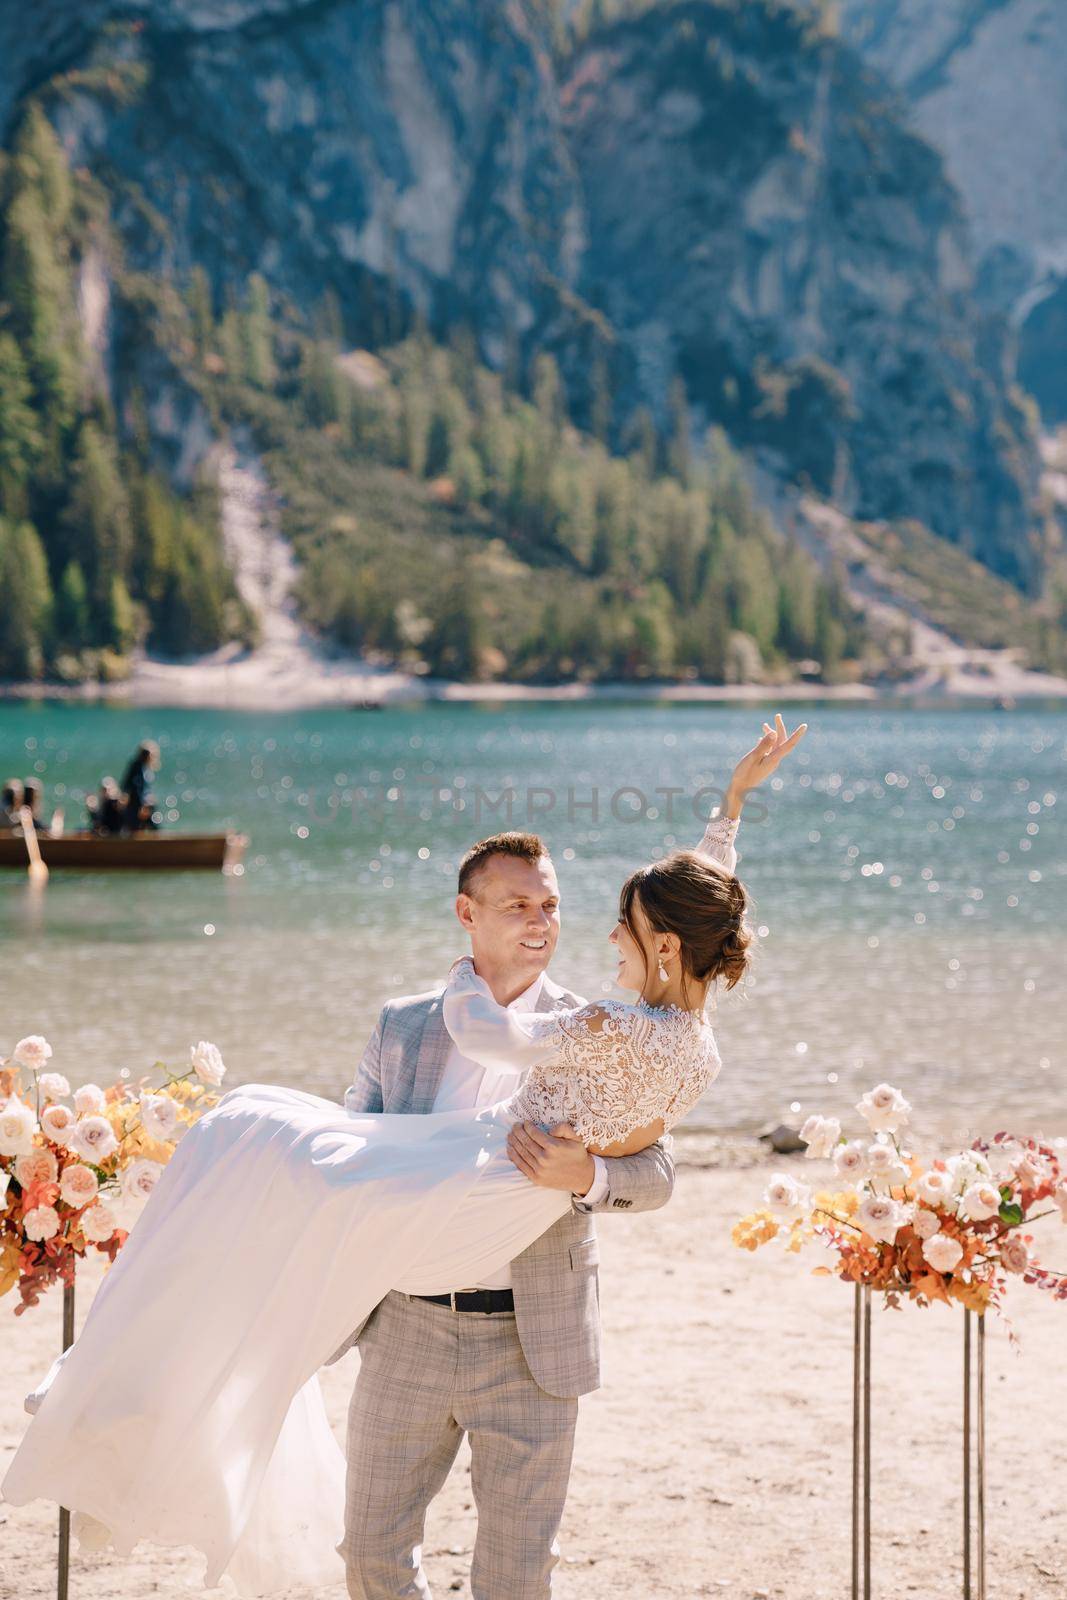 The groom circles the bride in her arms at the venue for the ceremony, with two autumn floral columns instead of an arch, against the backdrop of Lago di Braies in Italy